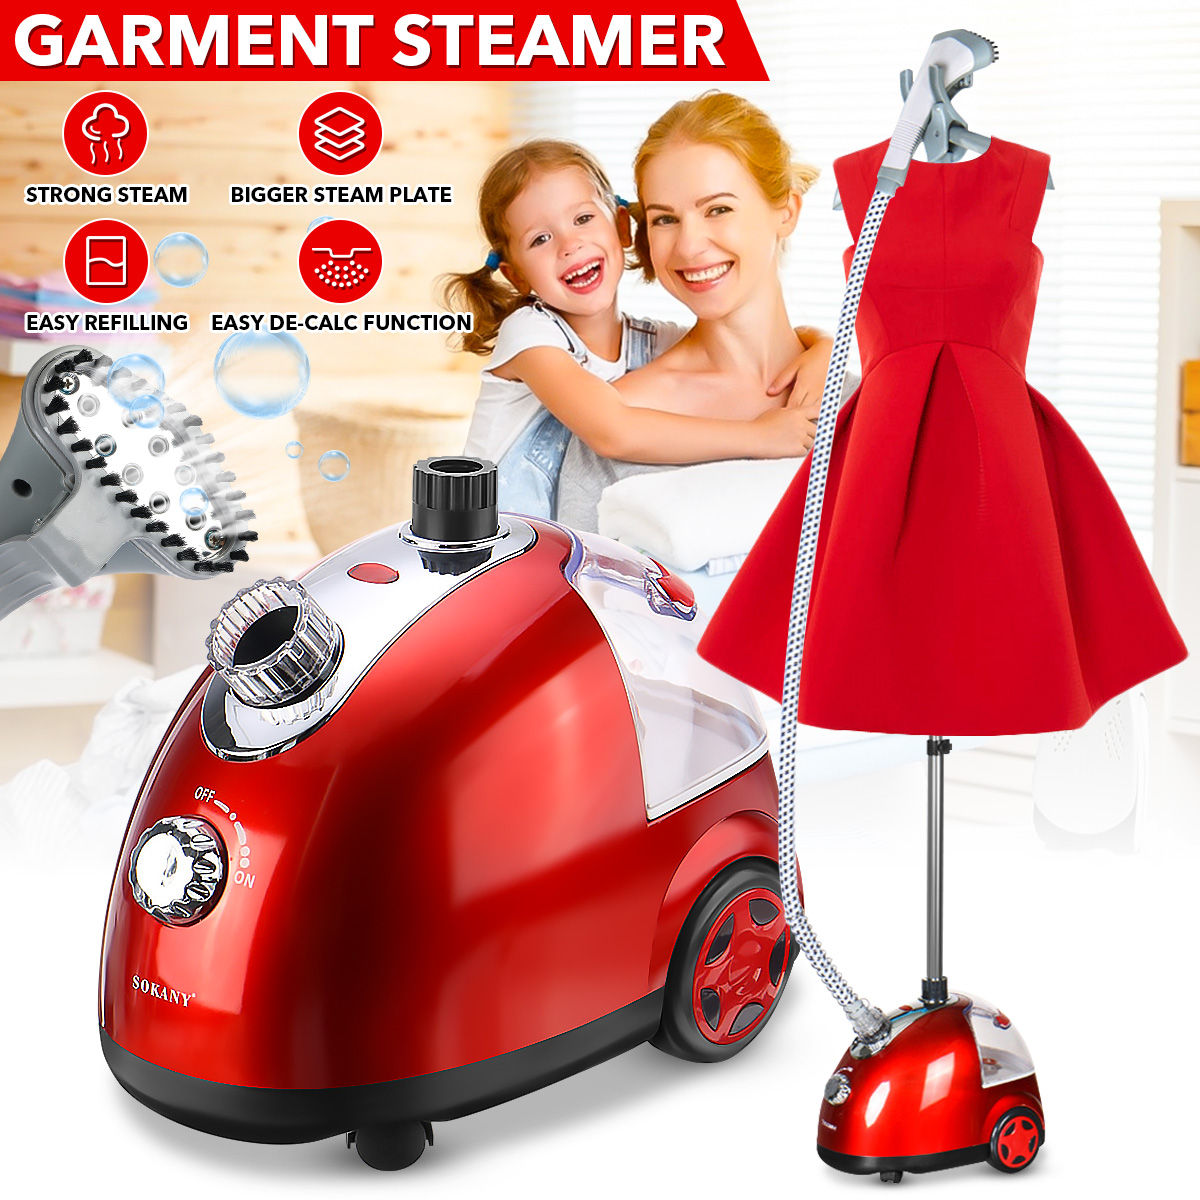 SOKANY-2000W-Clothing-Garment-Steamer-Portable-Fabric-Steamer-Vertical-Iron-Machine-for-Clothes-with-1937409-3